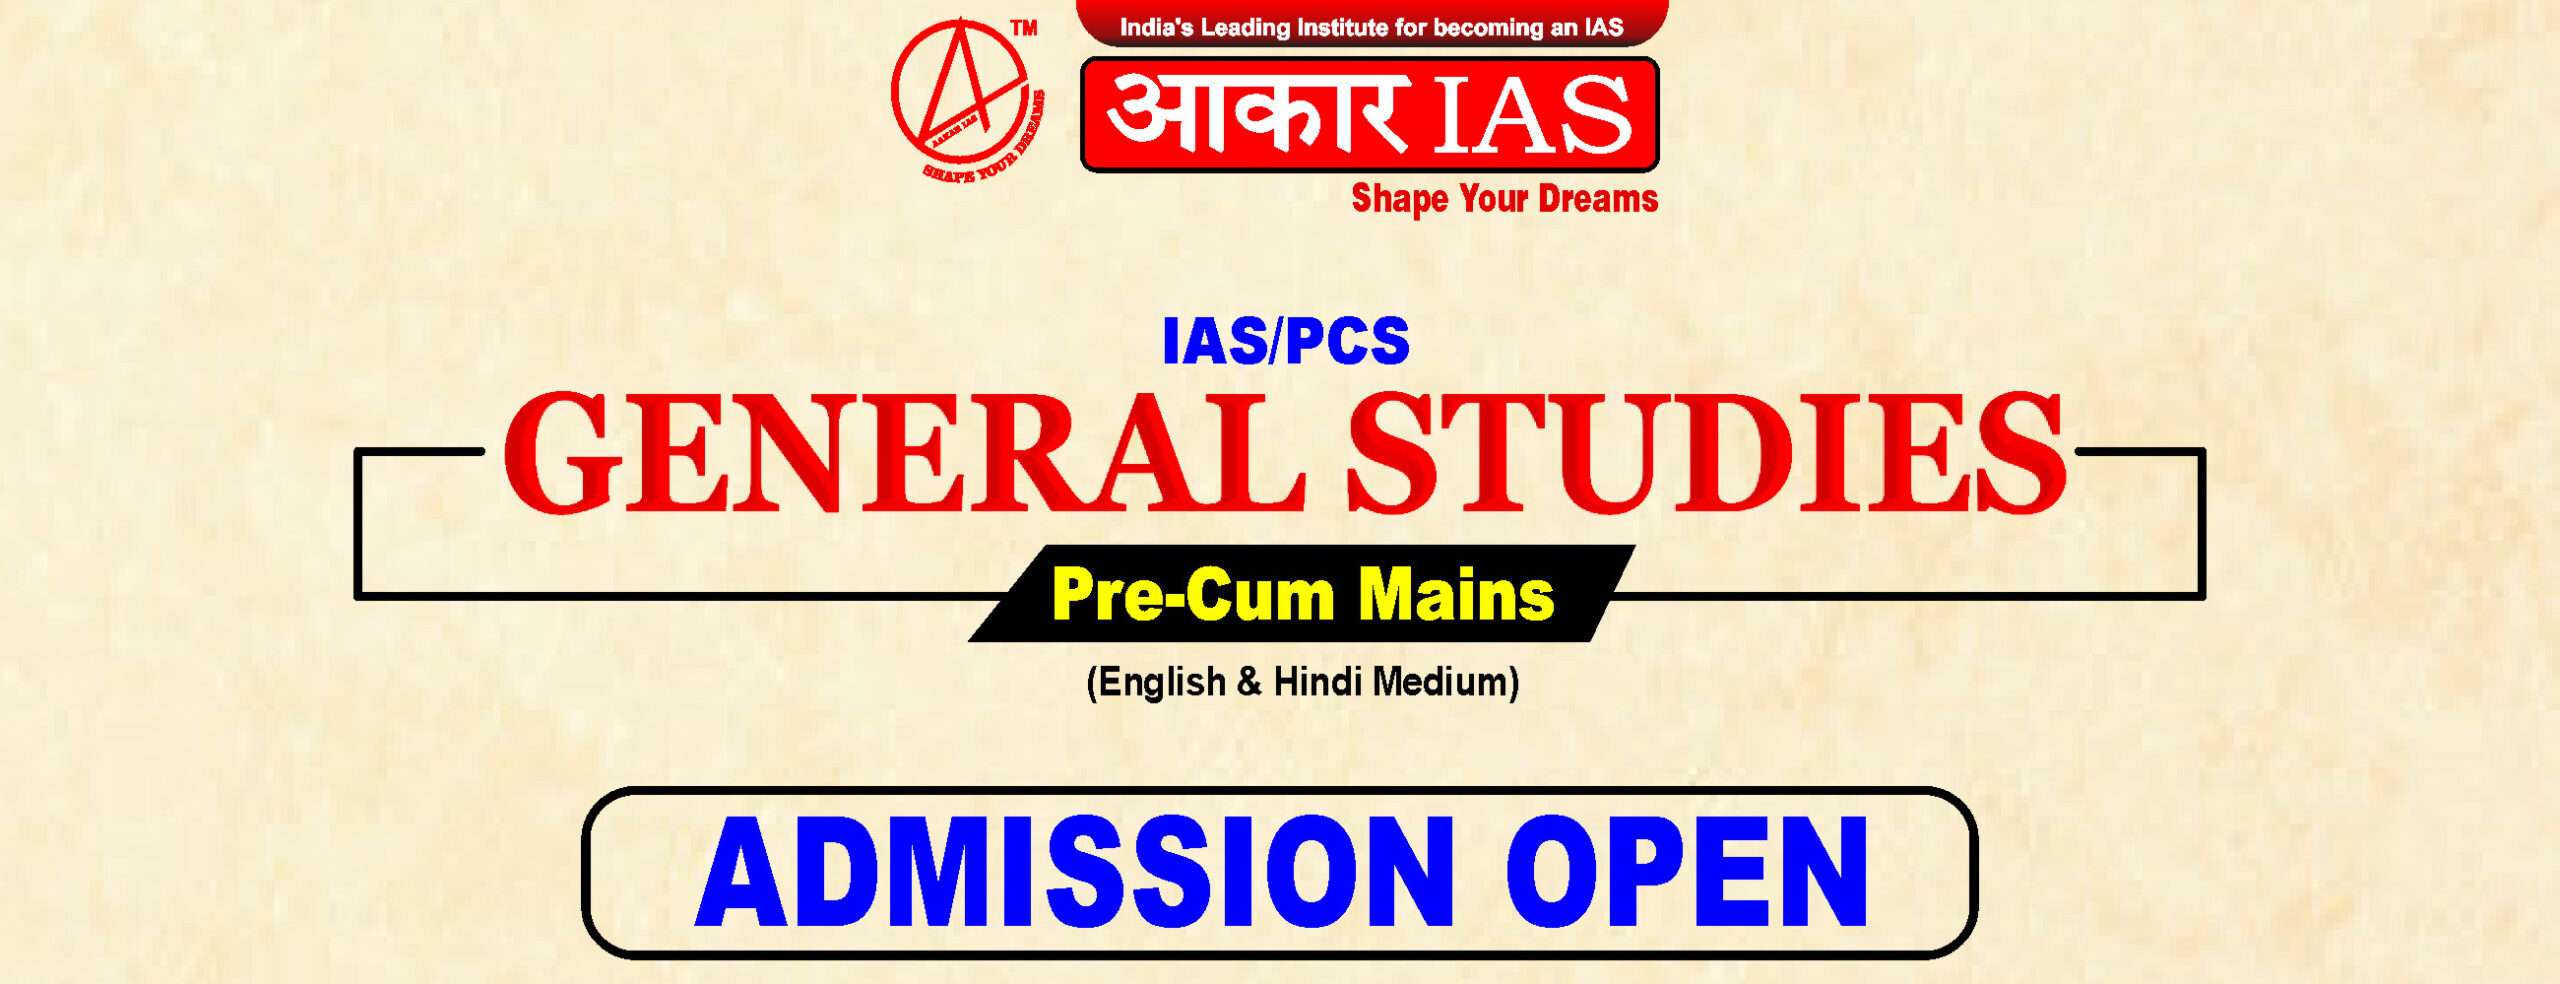 Aakar Ias admission open new batch